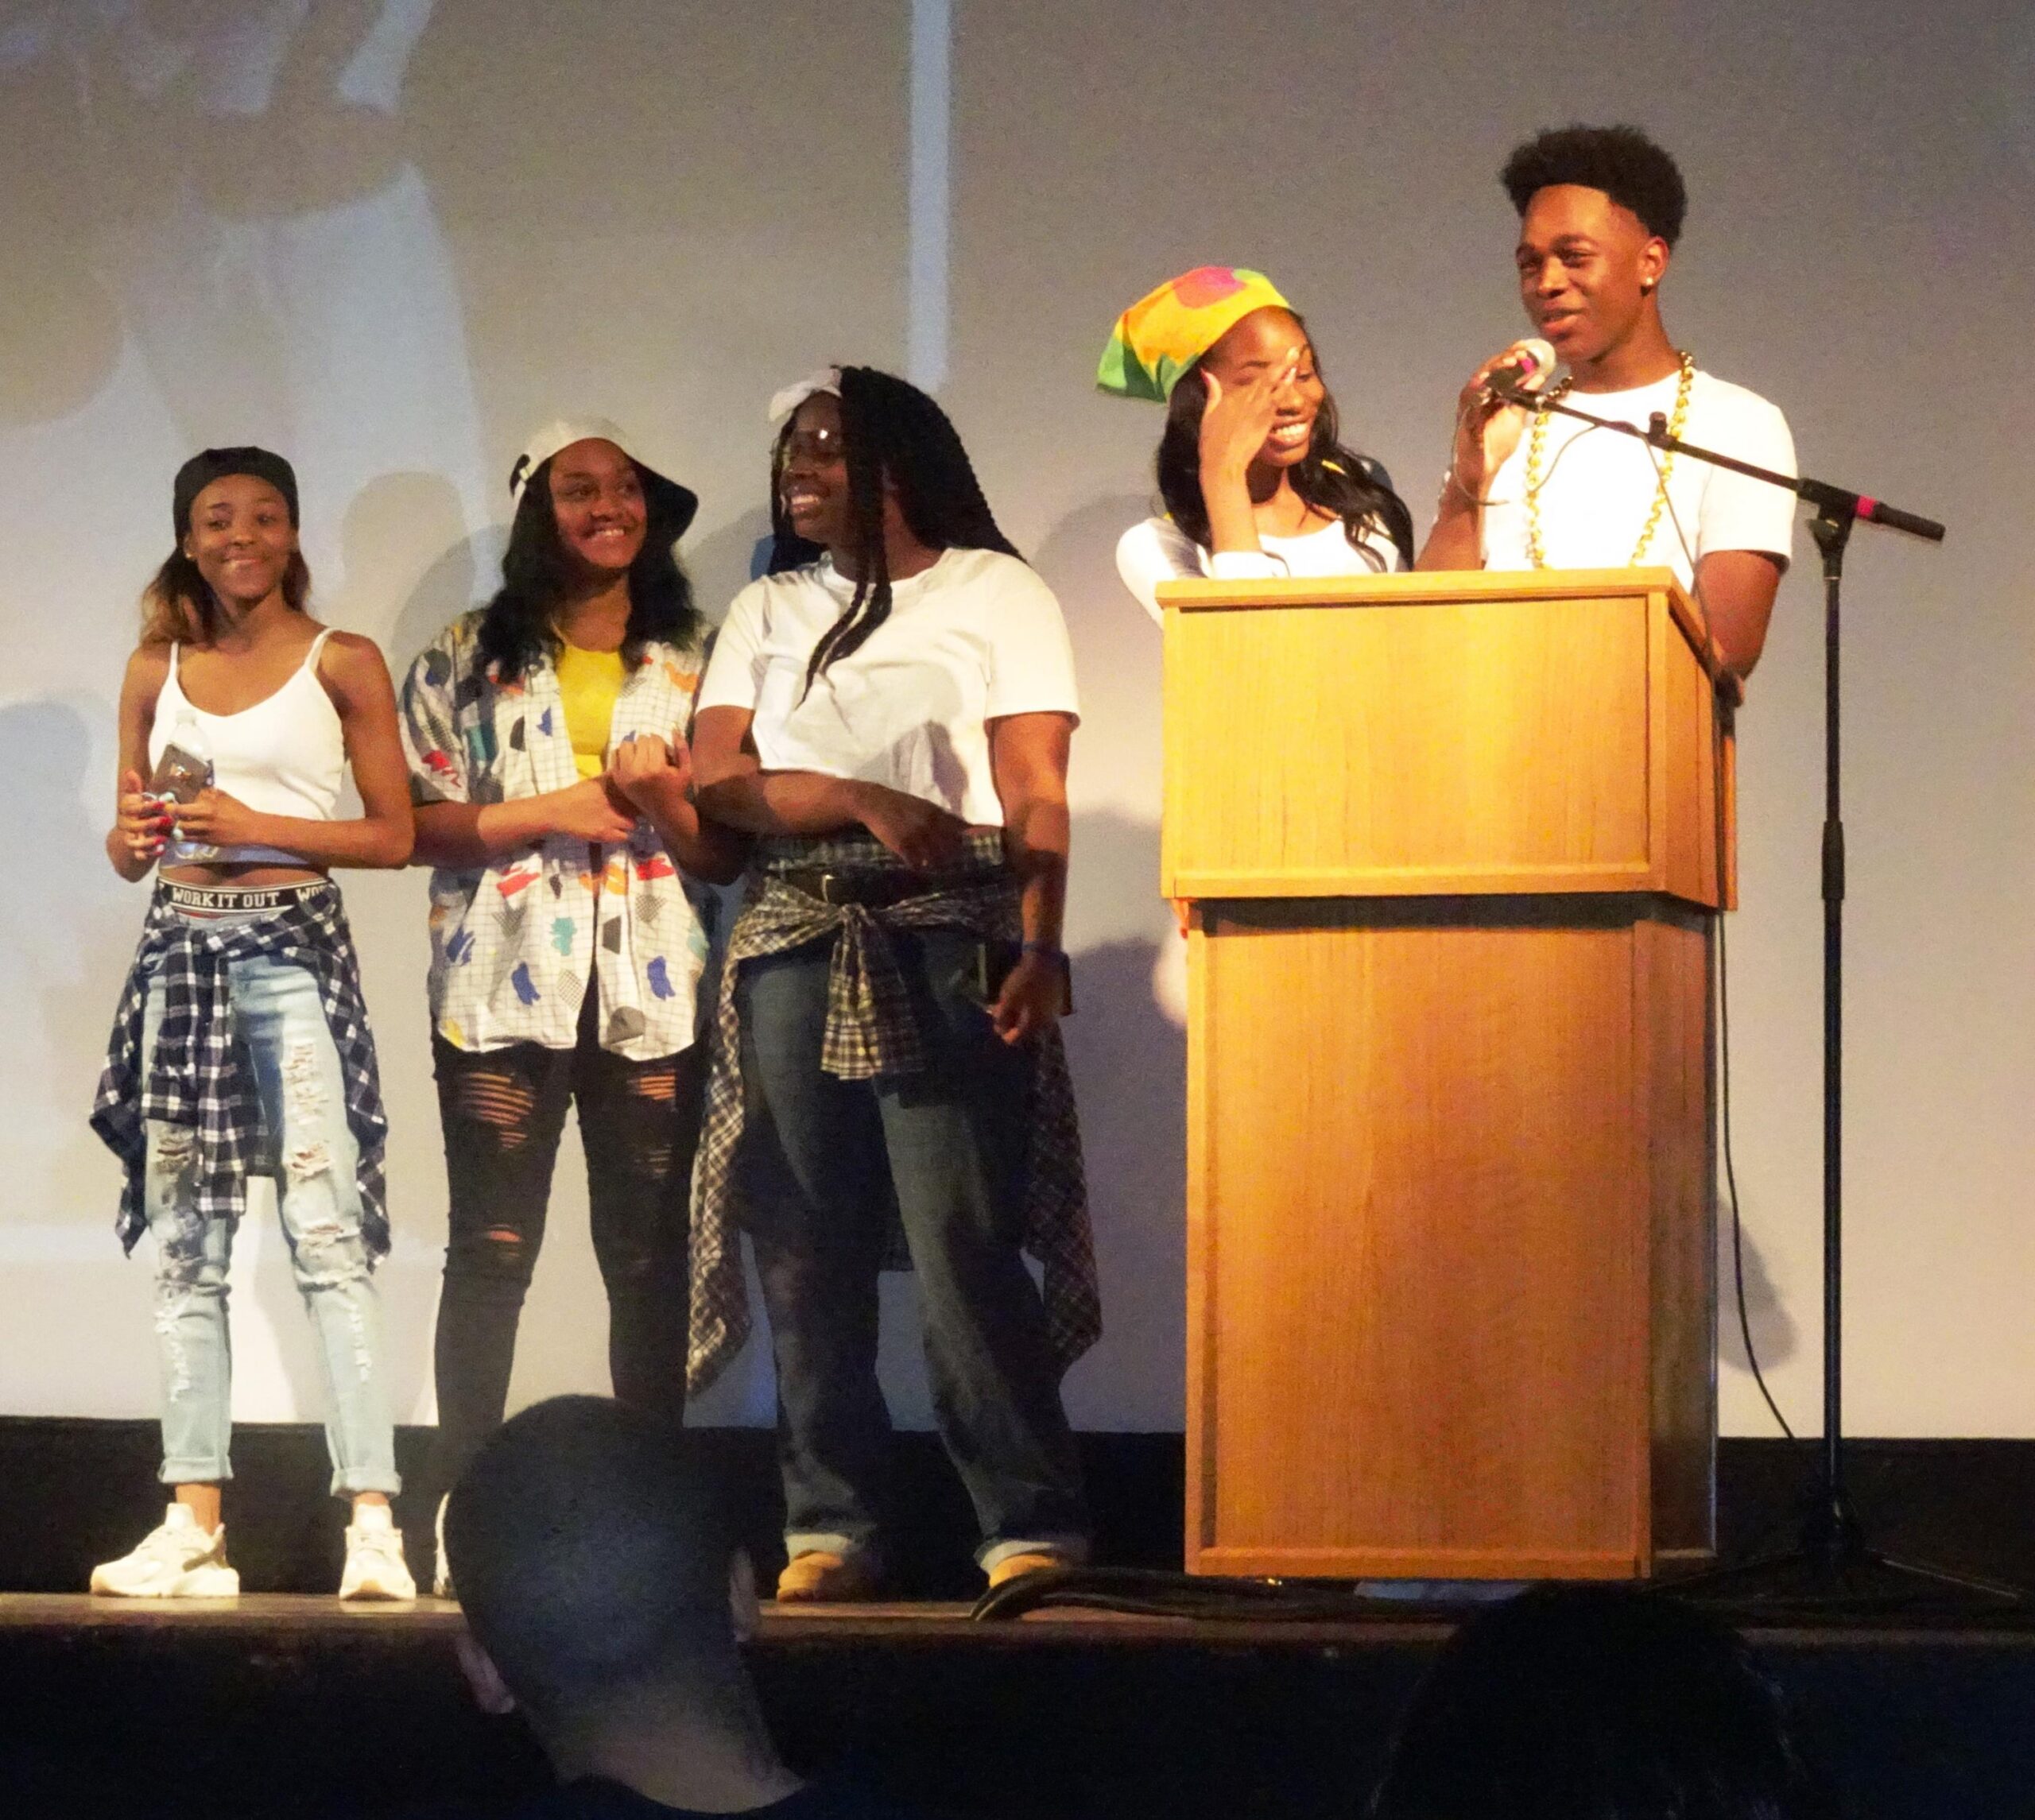 Members of X-Clusive Movement accepting the award for Hip-Hop Dancers of the Year